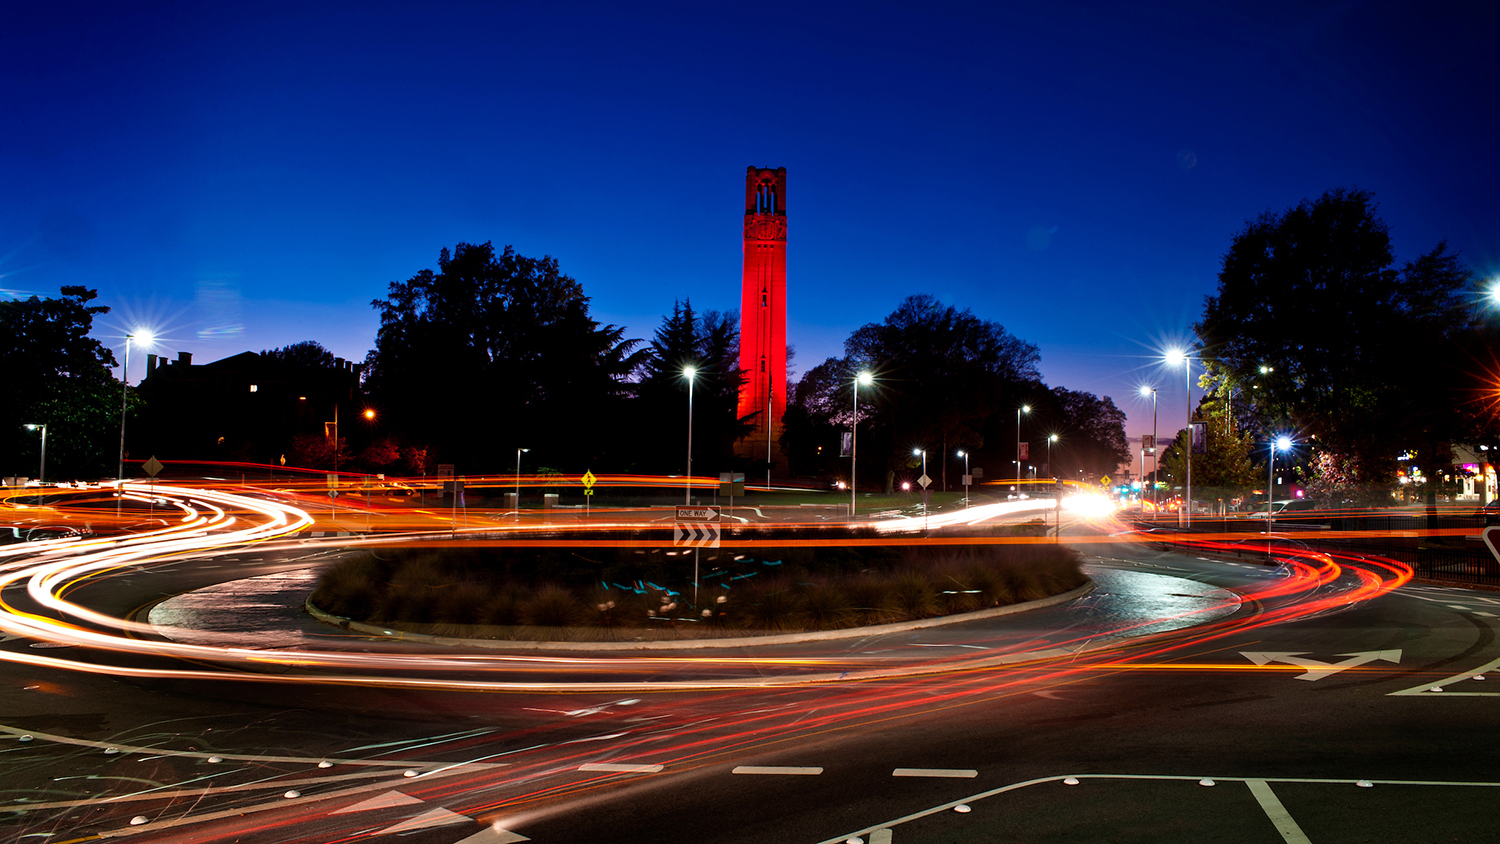 NC State belltower in red light with timelapse traffic headlights in foreground.